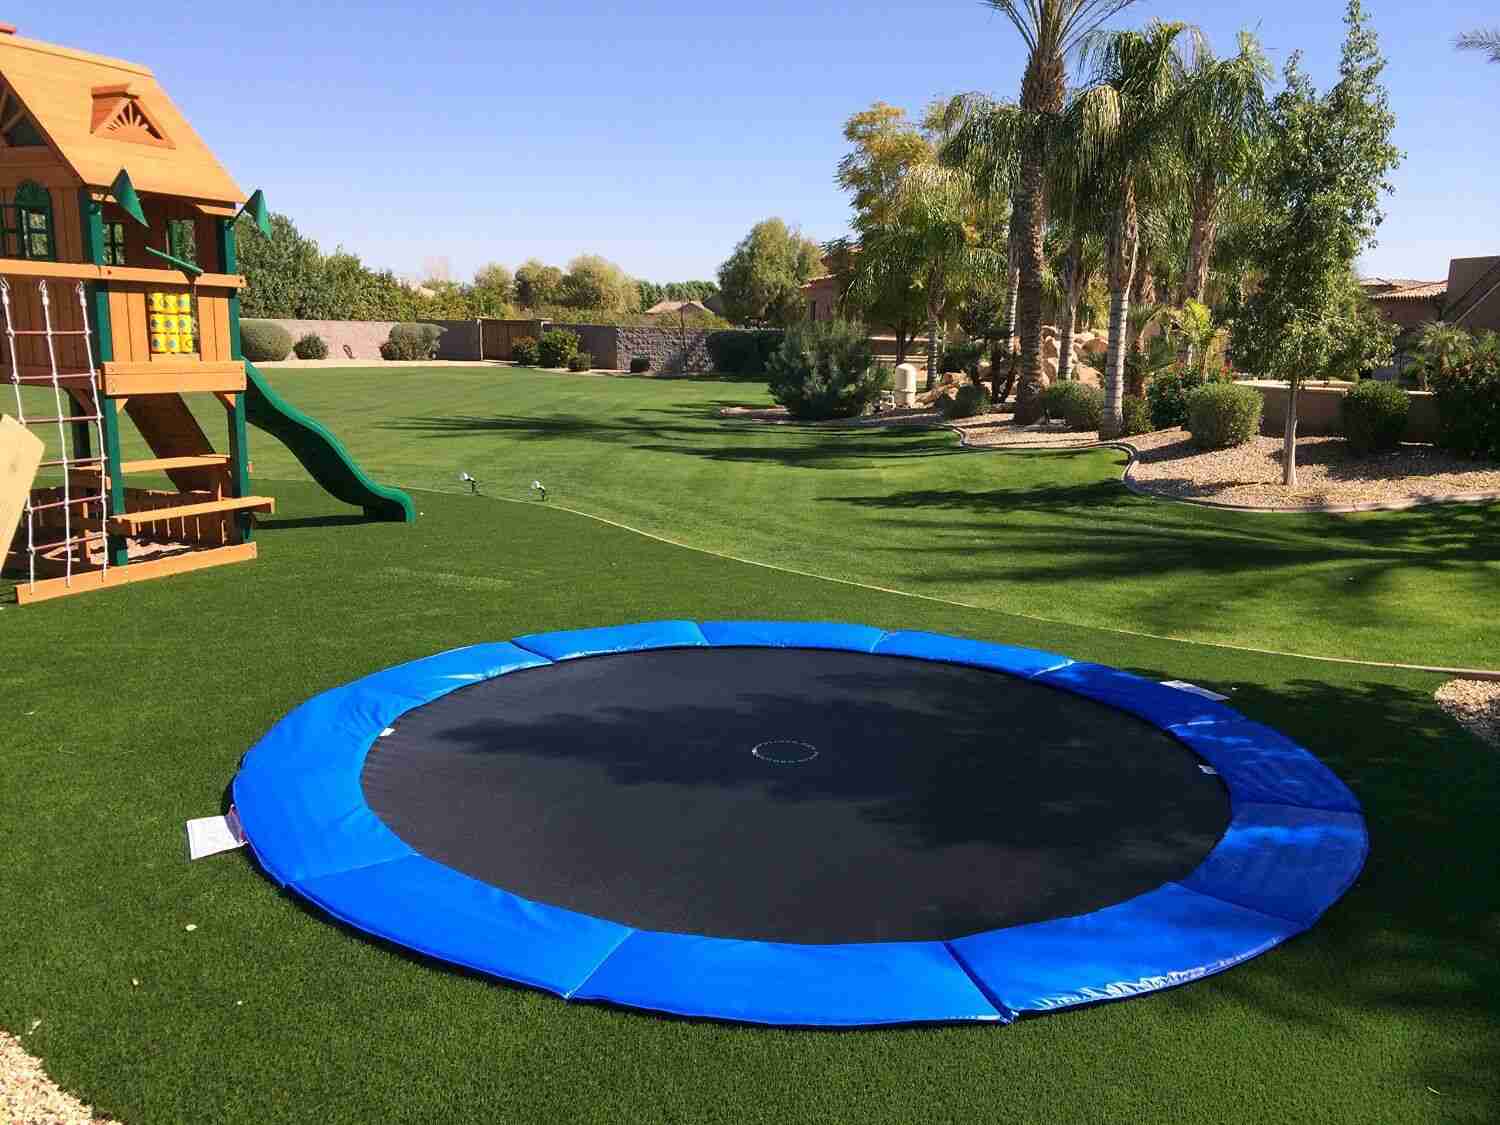 Are in-ground trampolines safe Get in the know with our expert guide